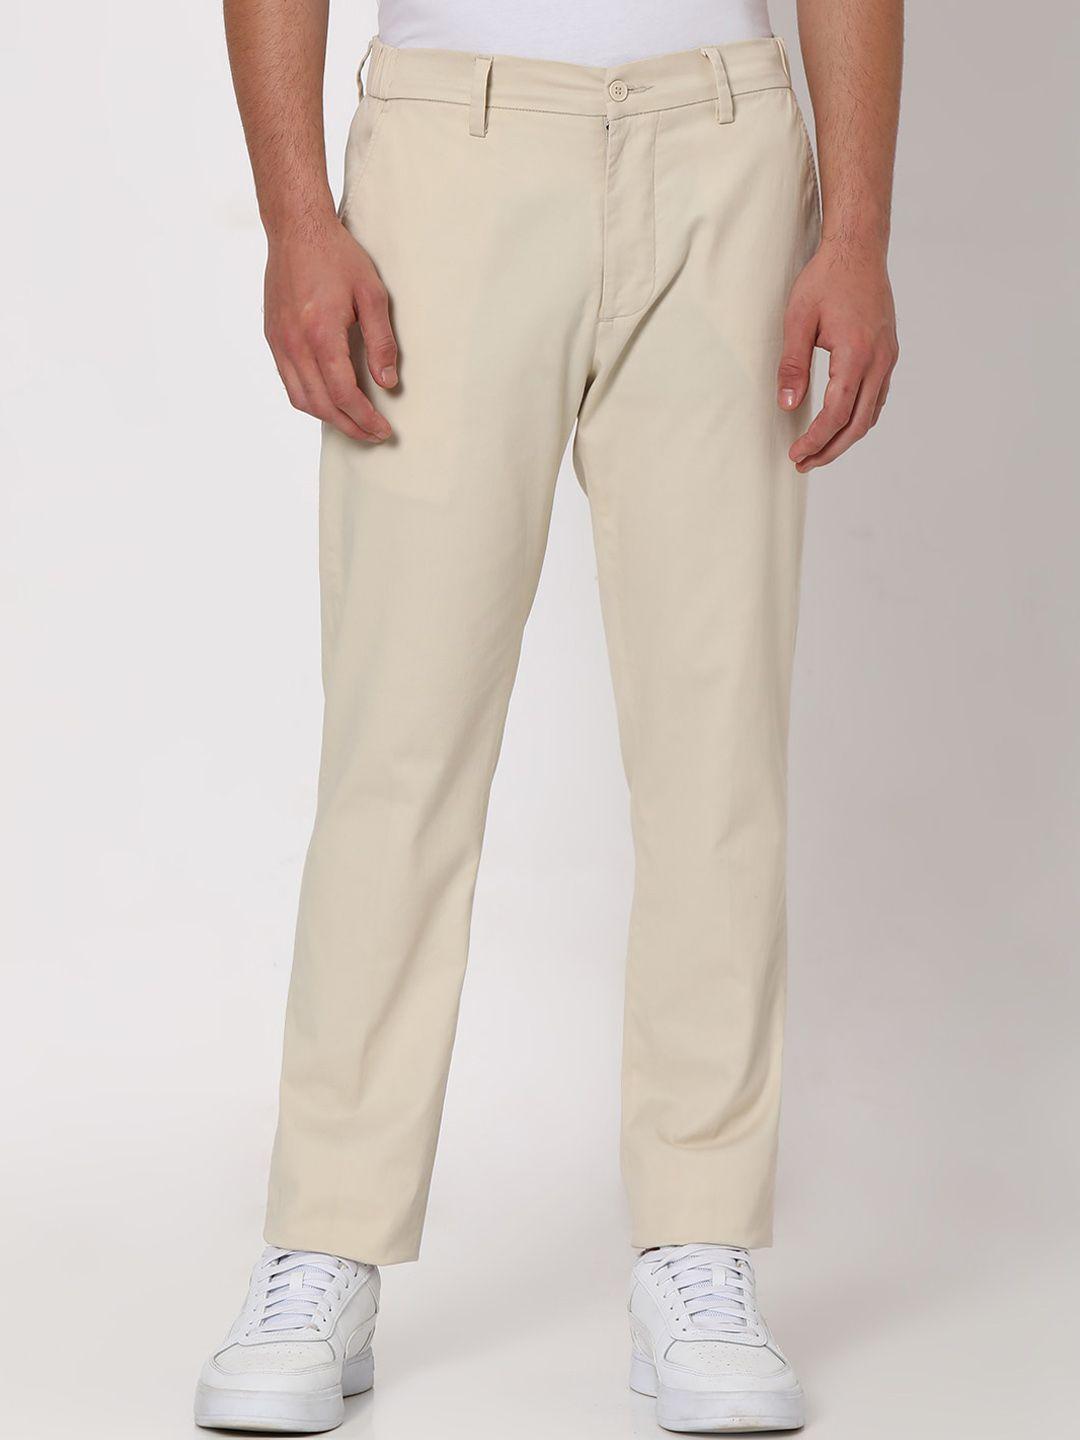 mufti men slim fit mid-rise chinos trouser